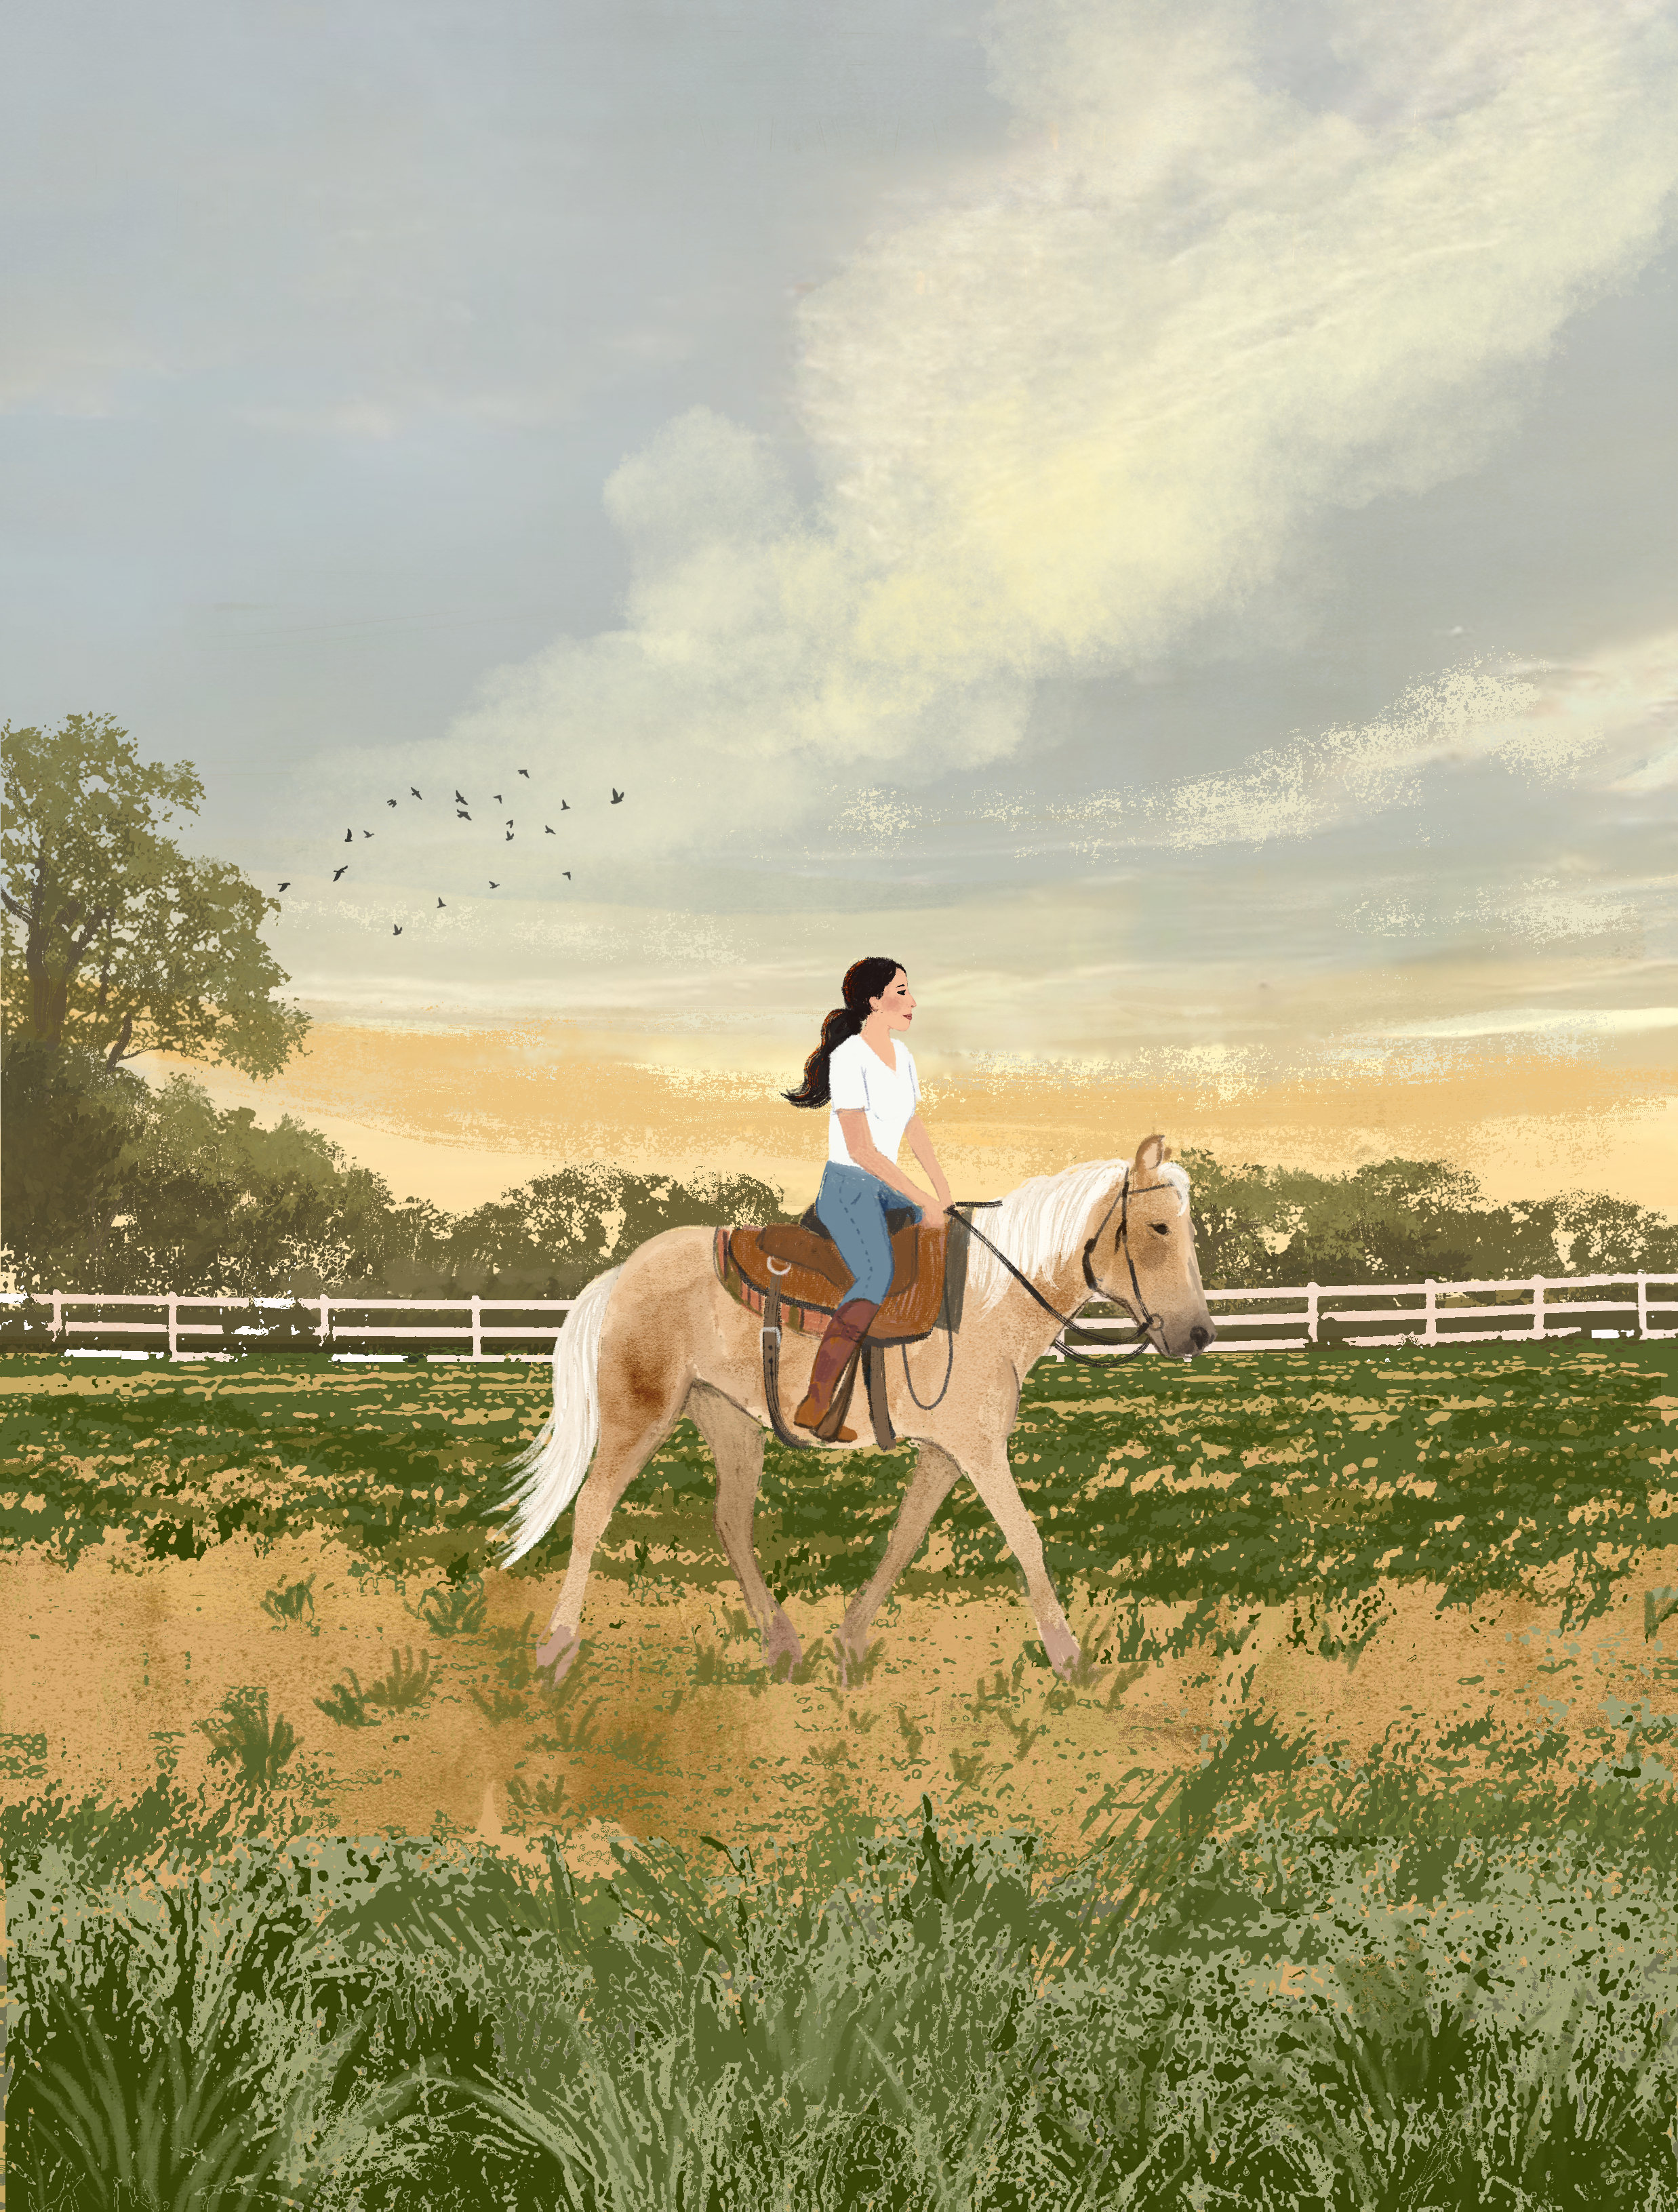 An illustration depicts Joanna Gaines riding a horse.